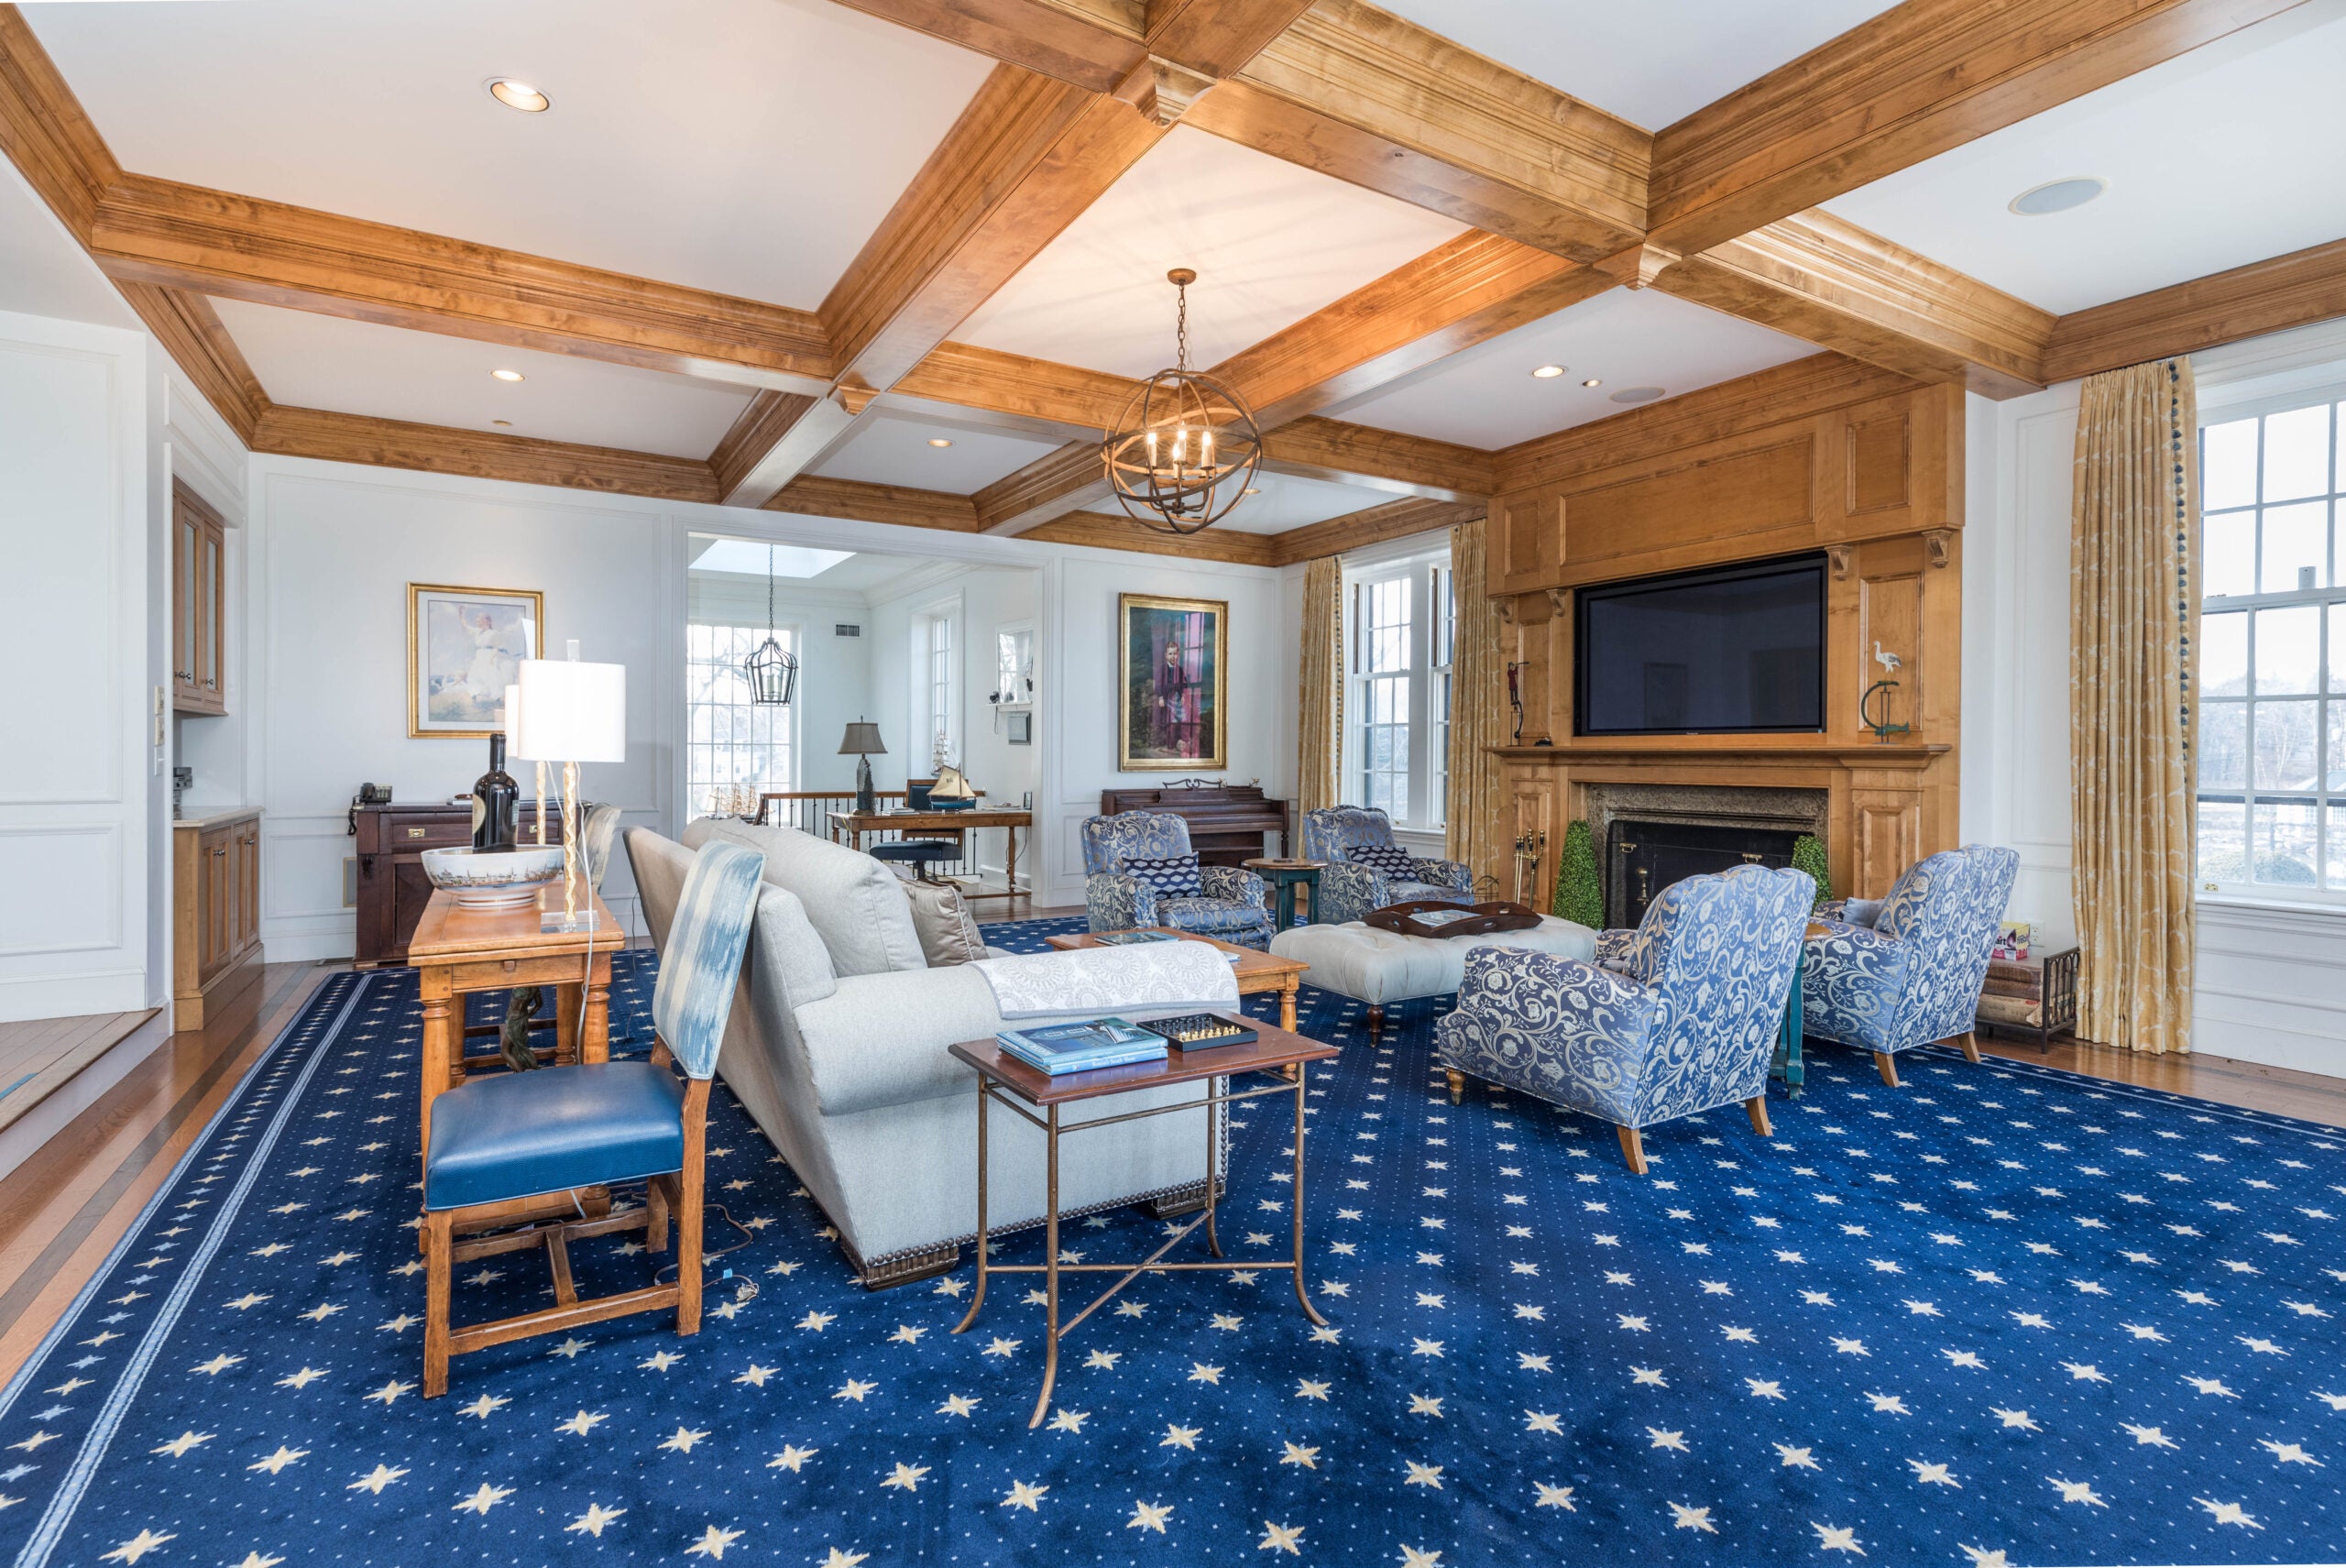 A room filled with overstuffed furniture. The ceiling is coffered with a warm-colored wood, and the floor-to-ceiling fireplace is clad in the same material. The carpeting is white stars on a medium-blue background.